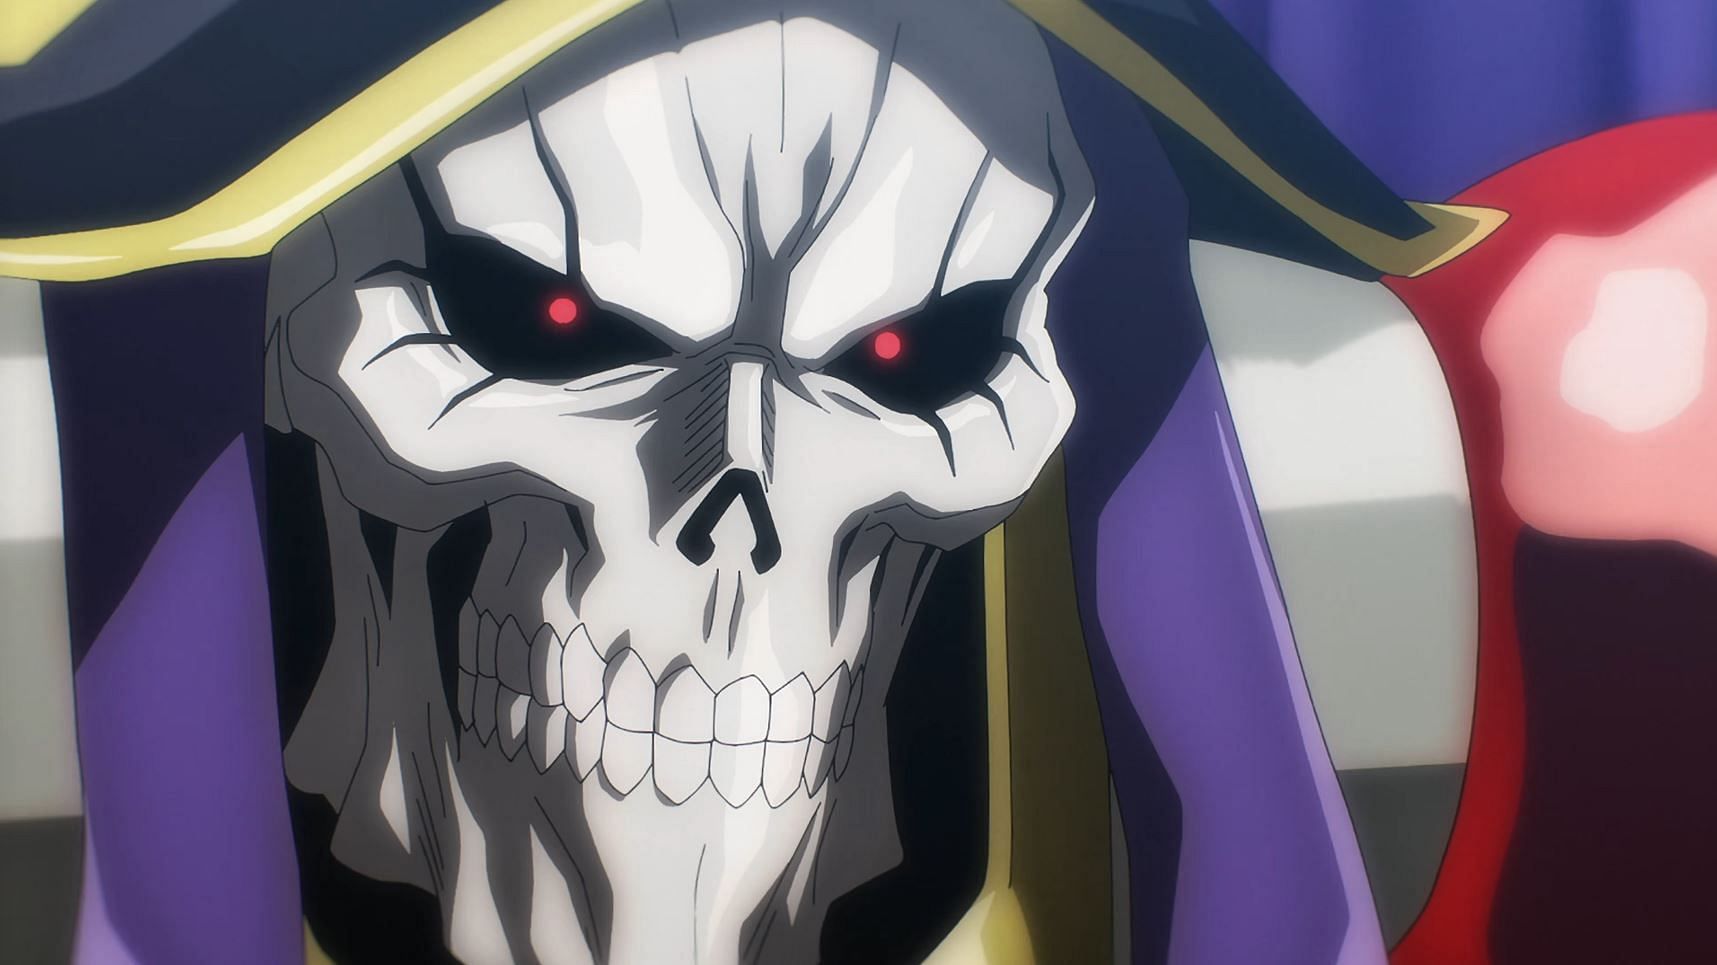 Overlord Season 4 Episode 9: Red Drop responds to the Sorcerer